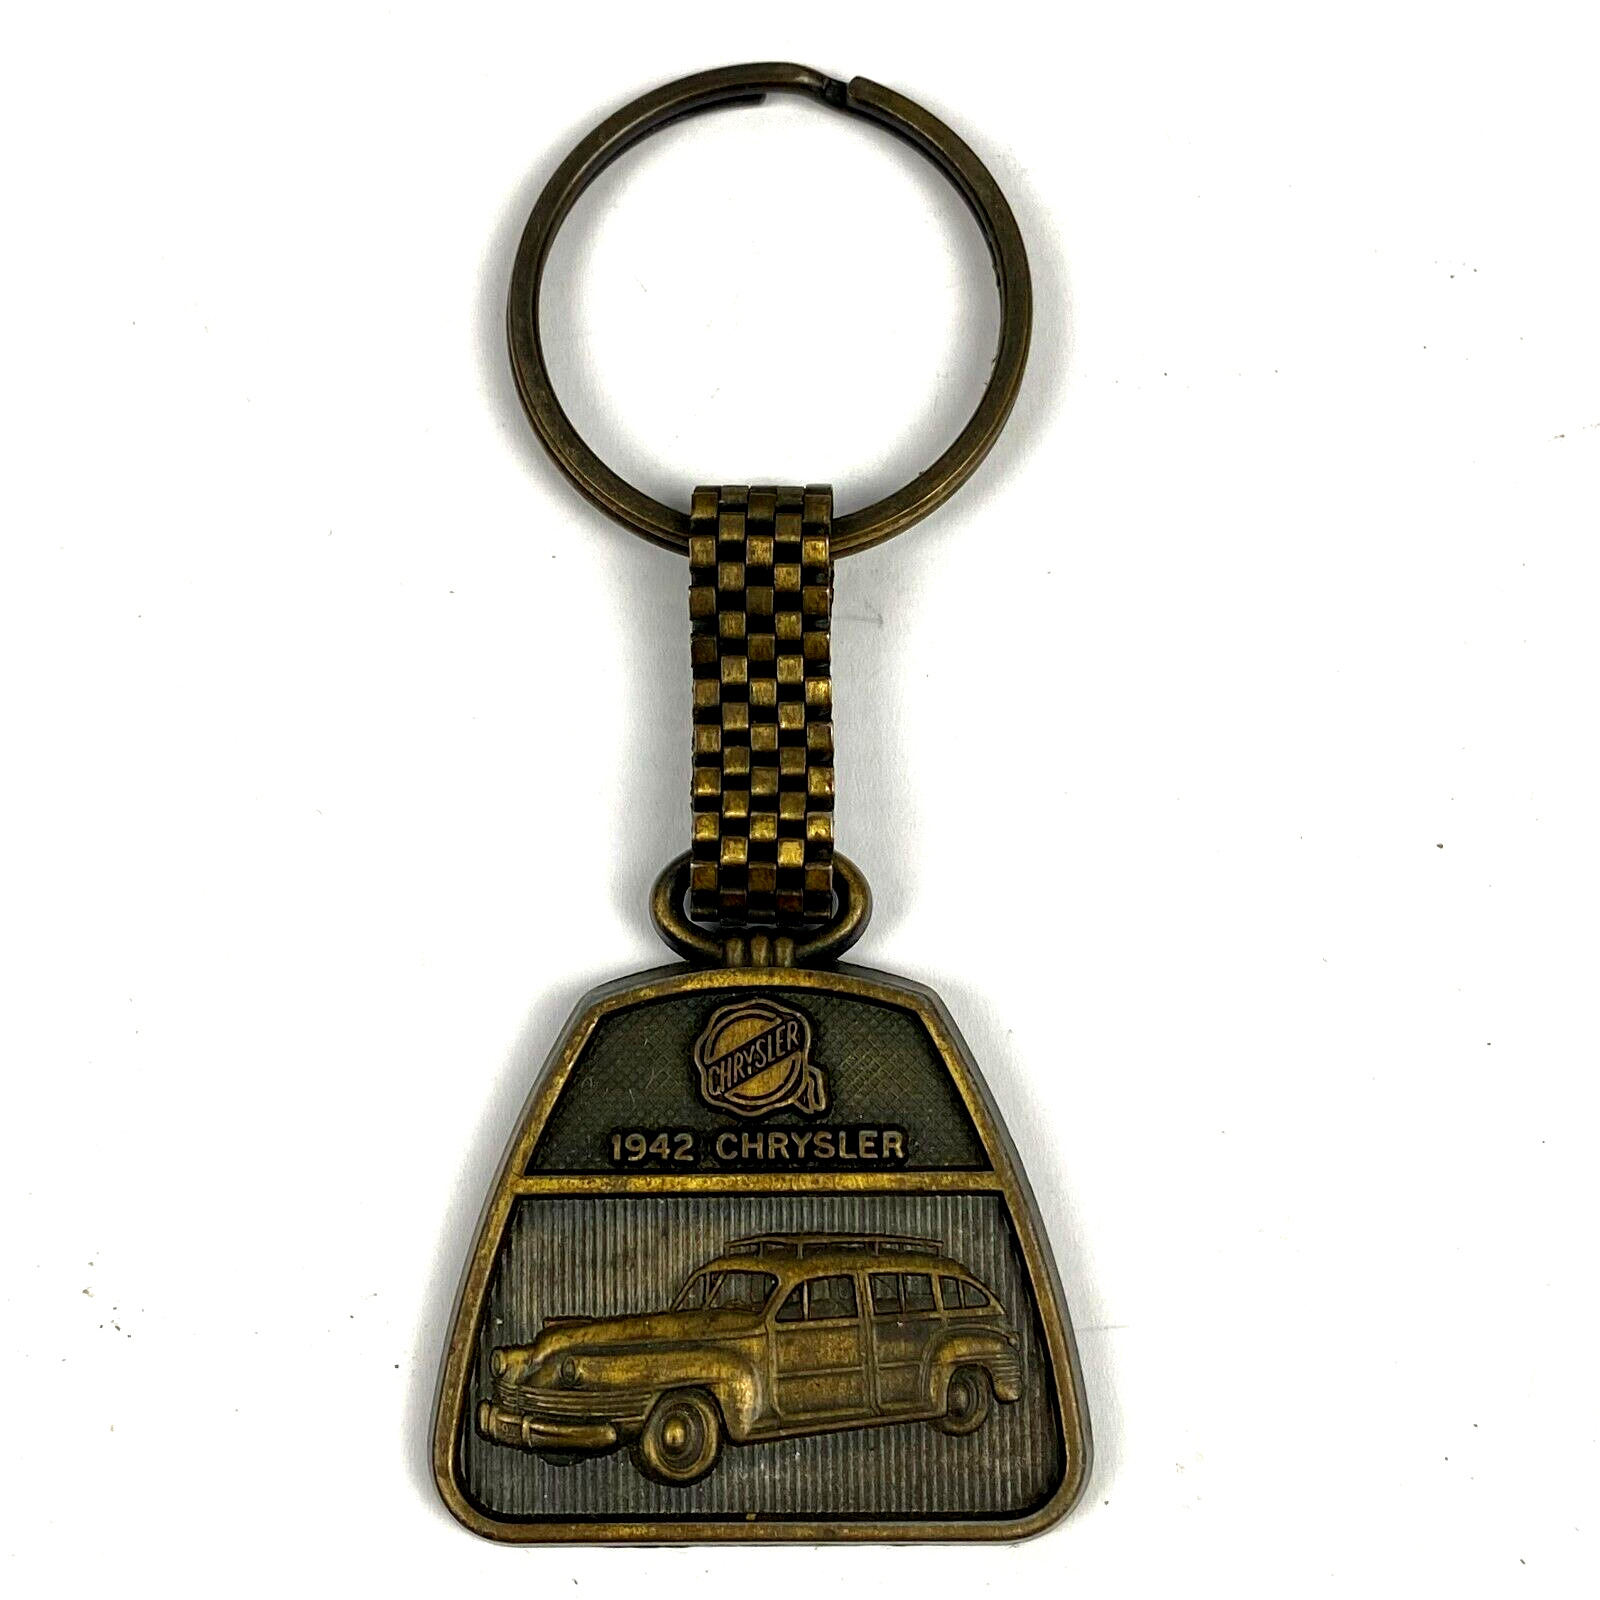 1942 Chrysler Town & Country 9 Passenger Wagon Woody Metal Keychain Fob Vintage